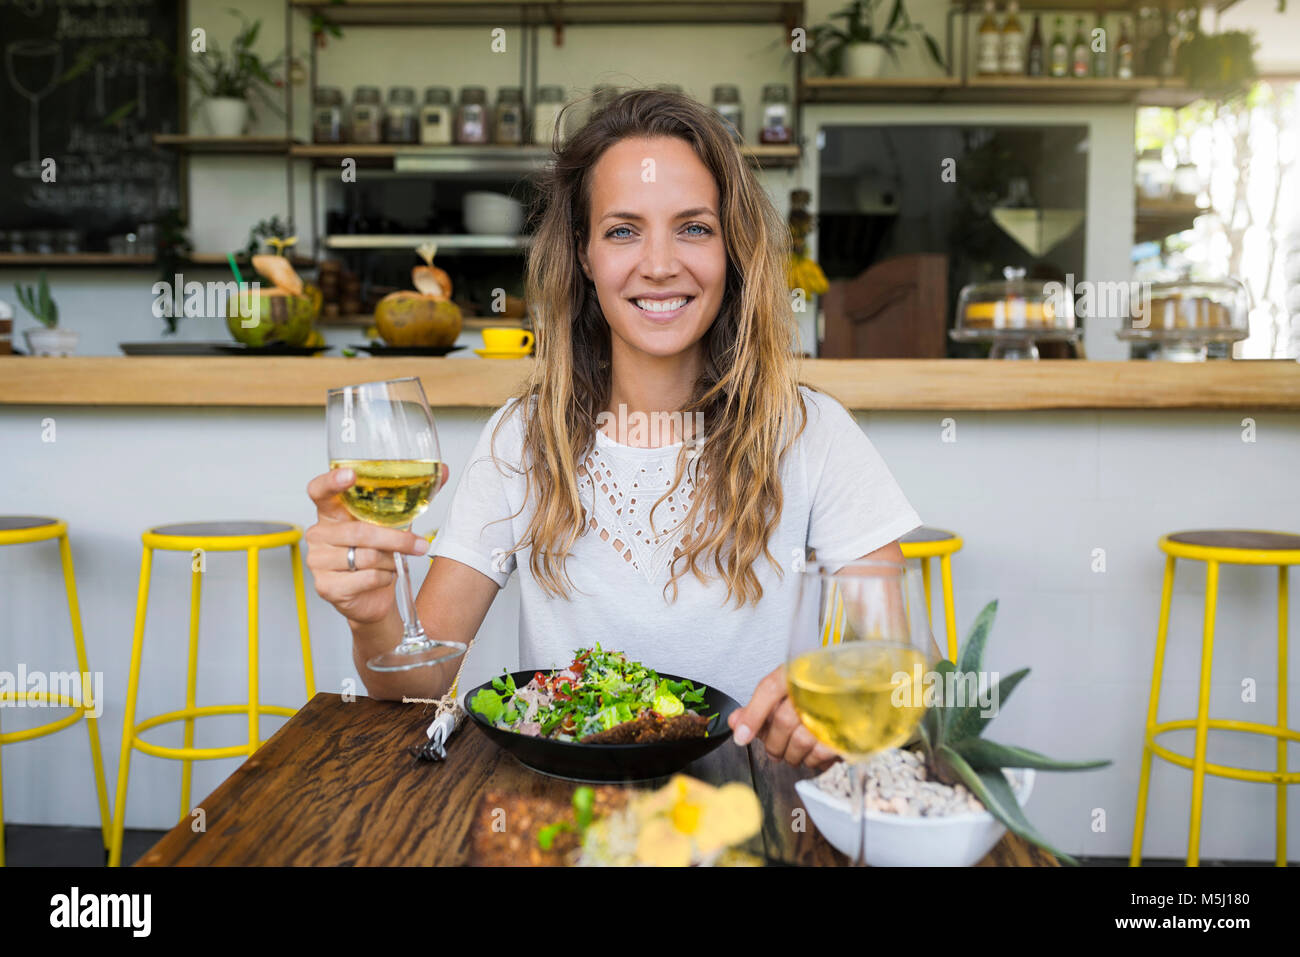 Portrait of smiling woman holding glass of wine in a cafe Banque D'Images